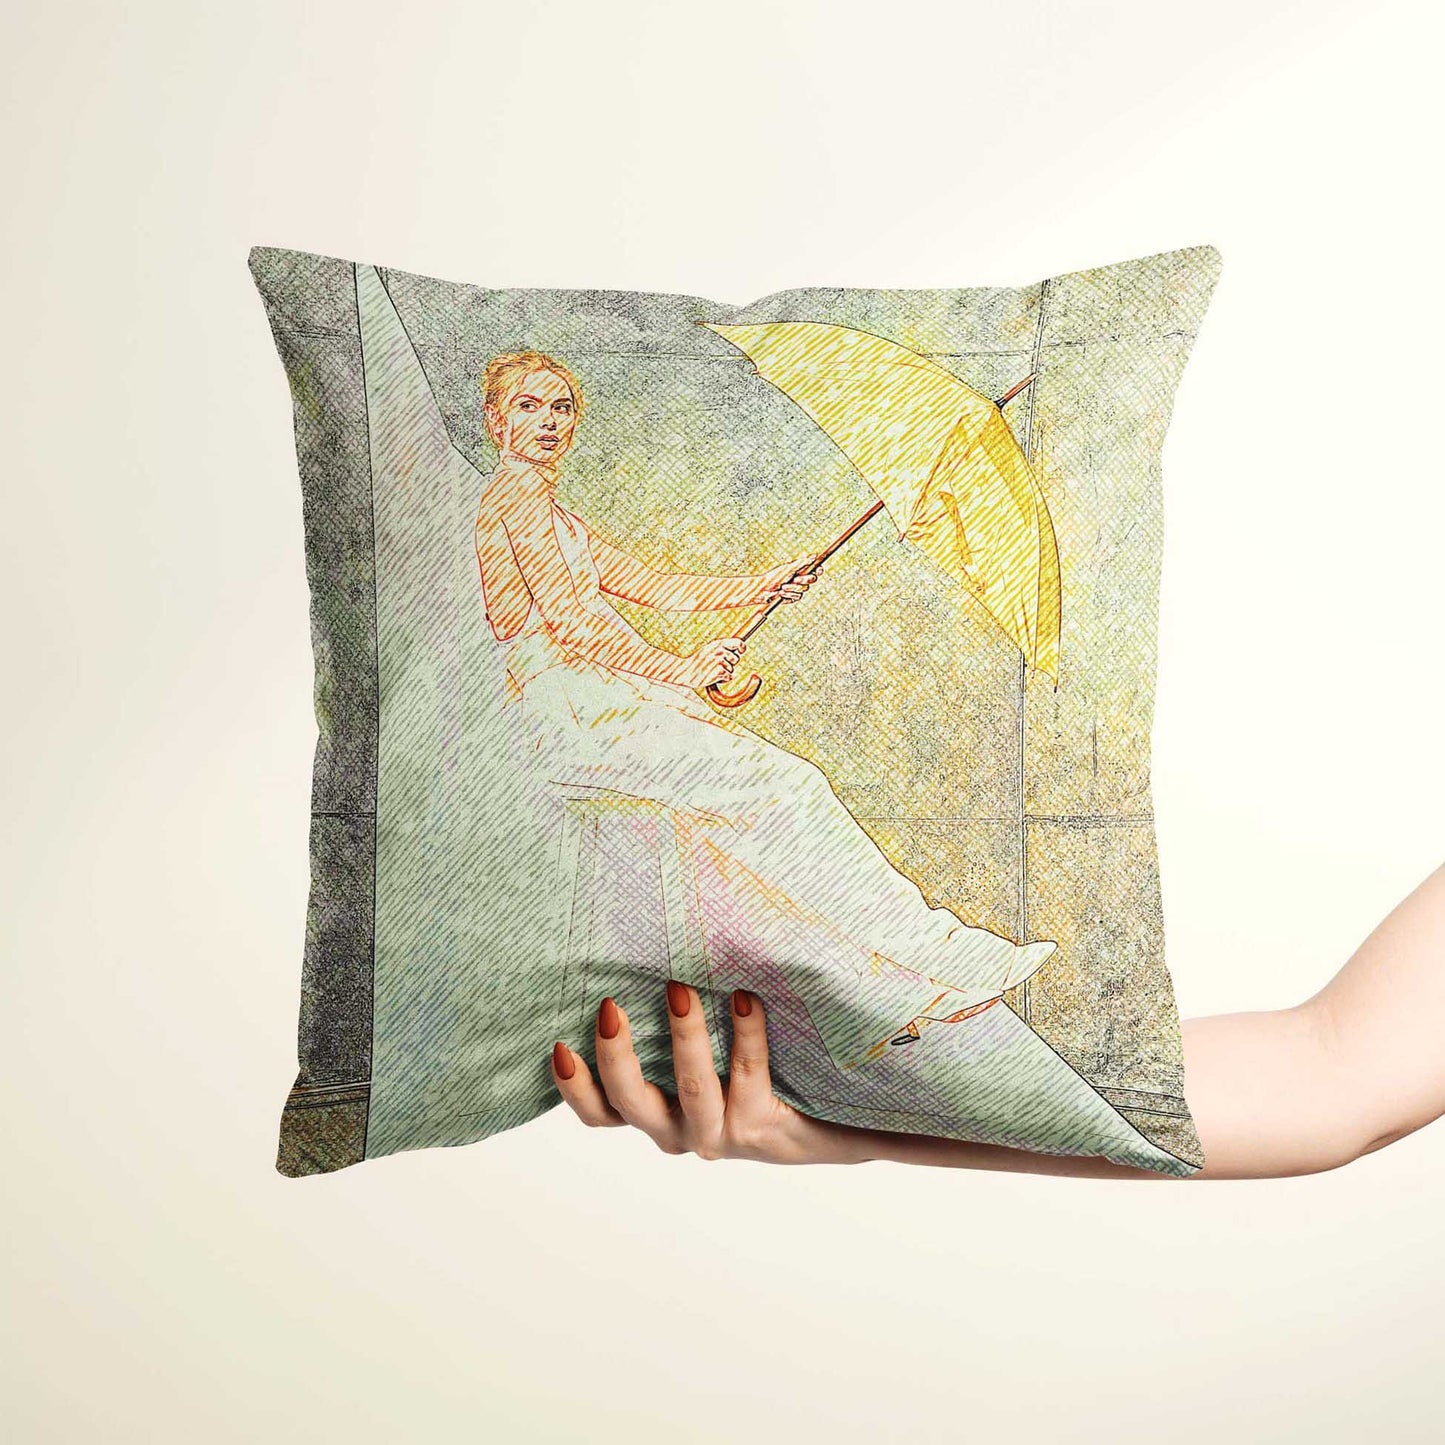 Experience ultimate relaxation with the Personalised Drawing Crosshatch Cushion. Its soft velvet material provides a plush and comfortable feel, perfect for unwinding after a long day. The cushion's unique design